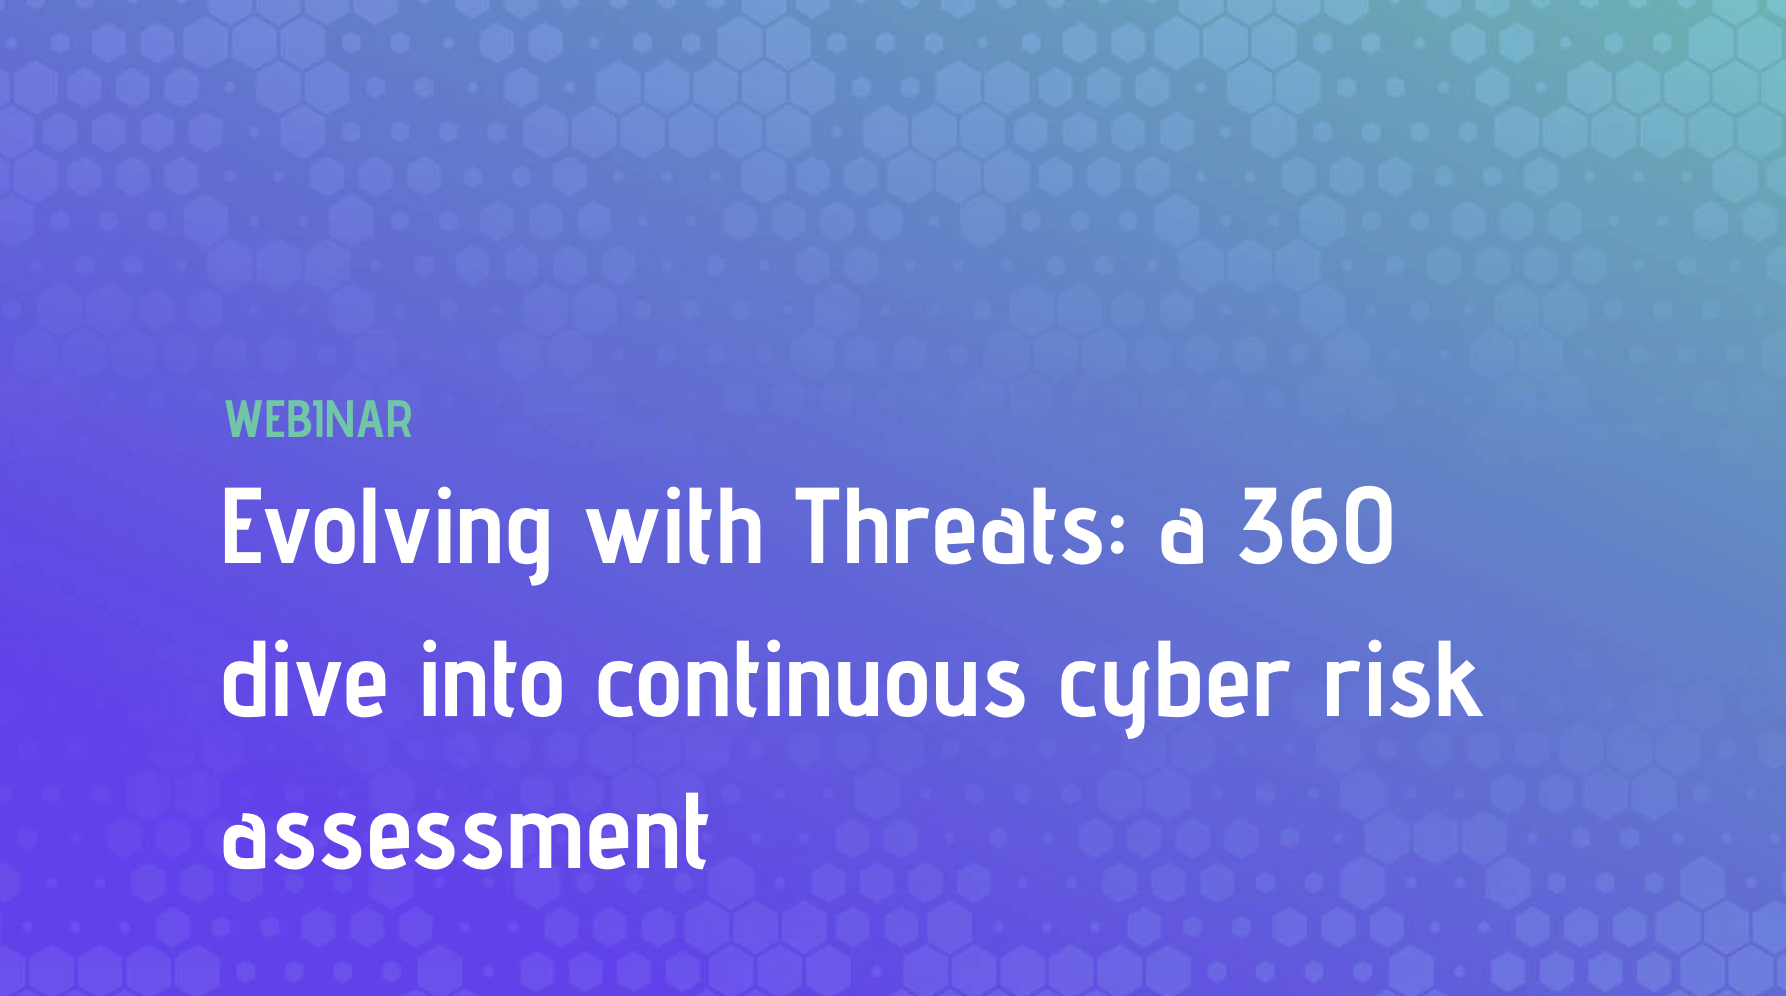 Evolving with Threats: a 360 dive into continuous cyber risk assessment